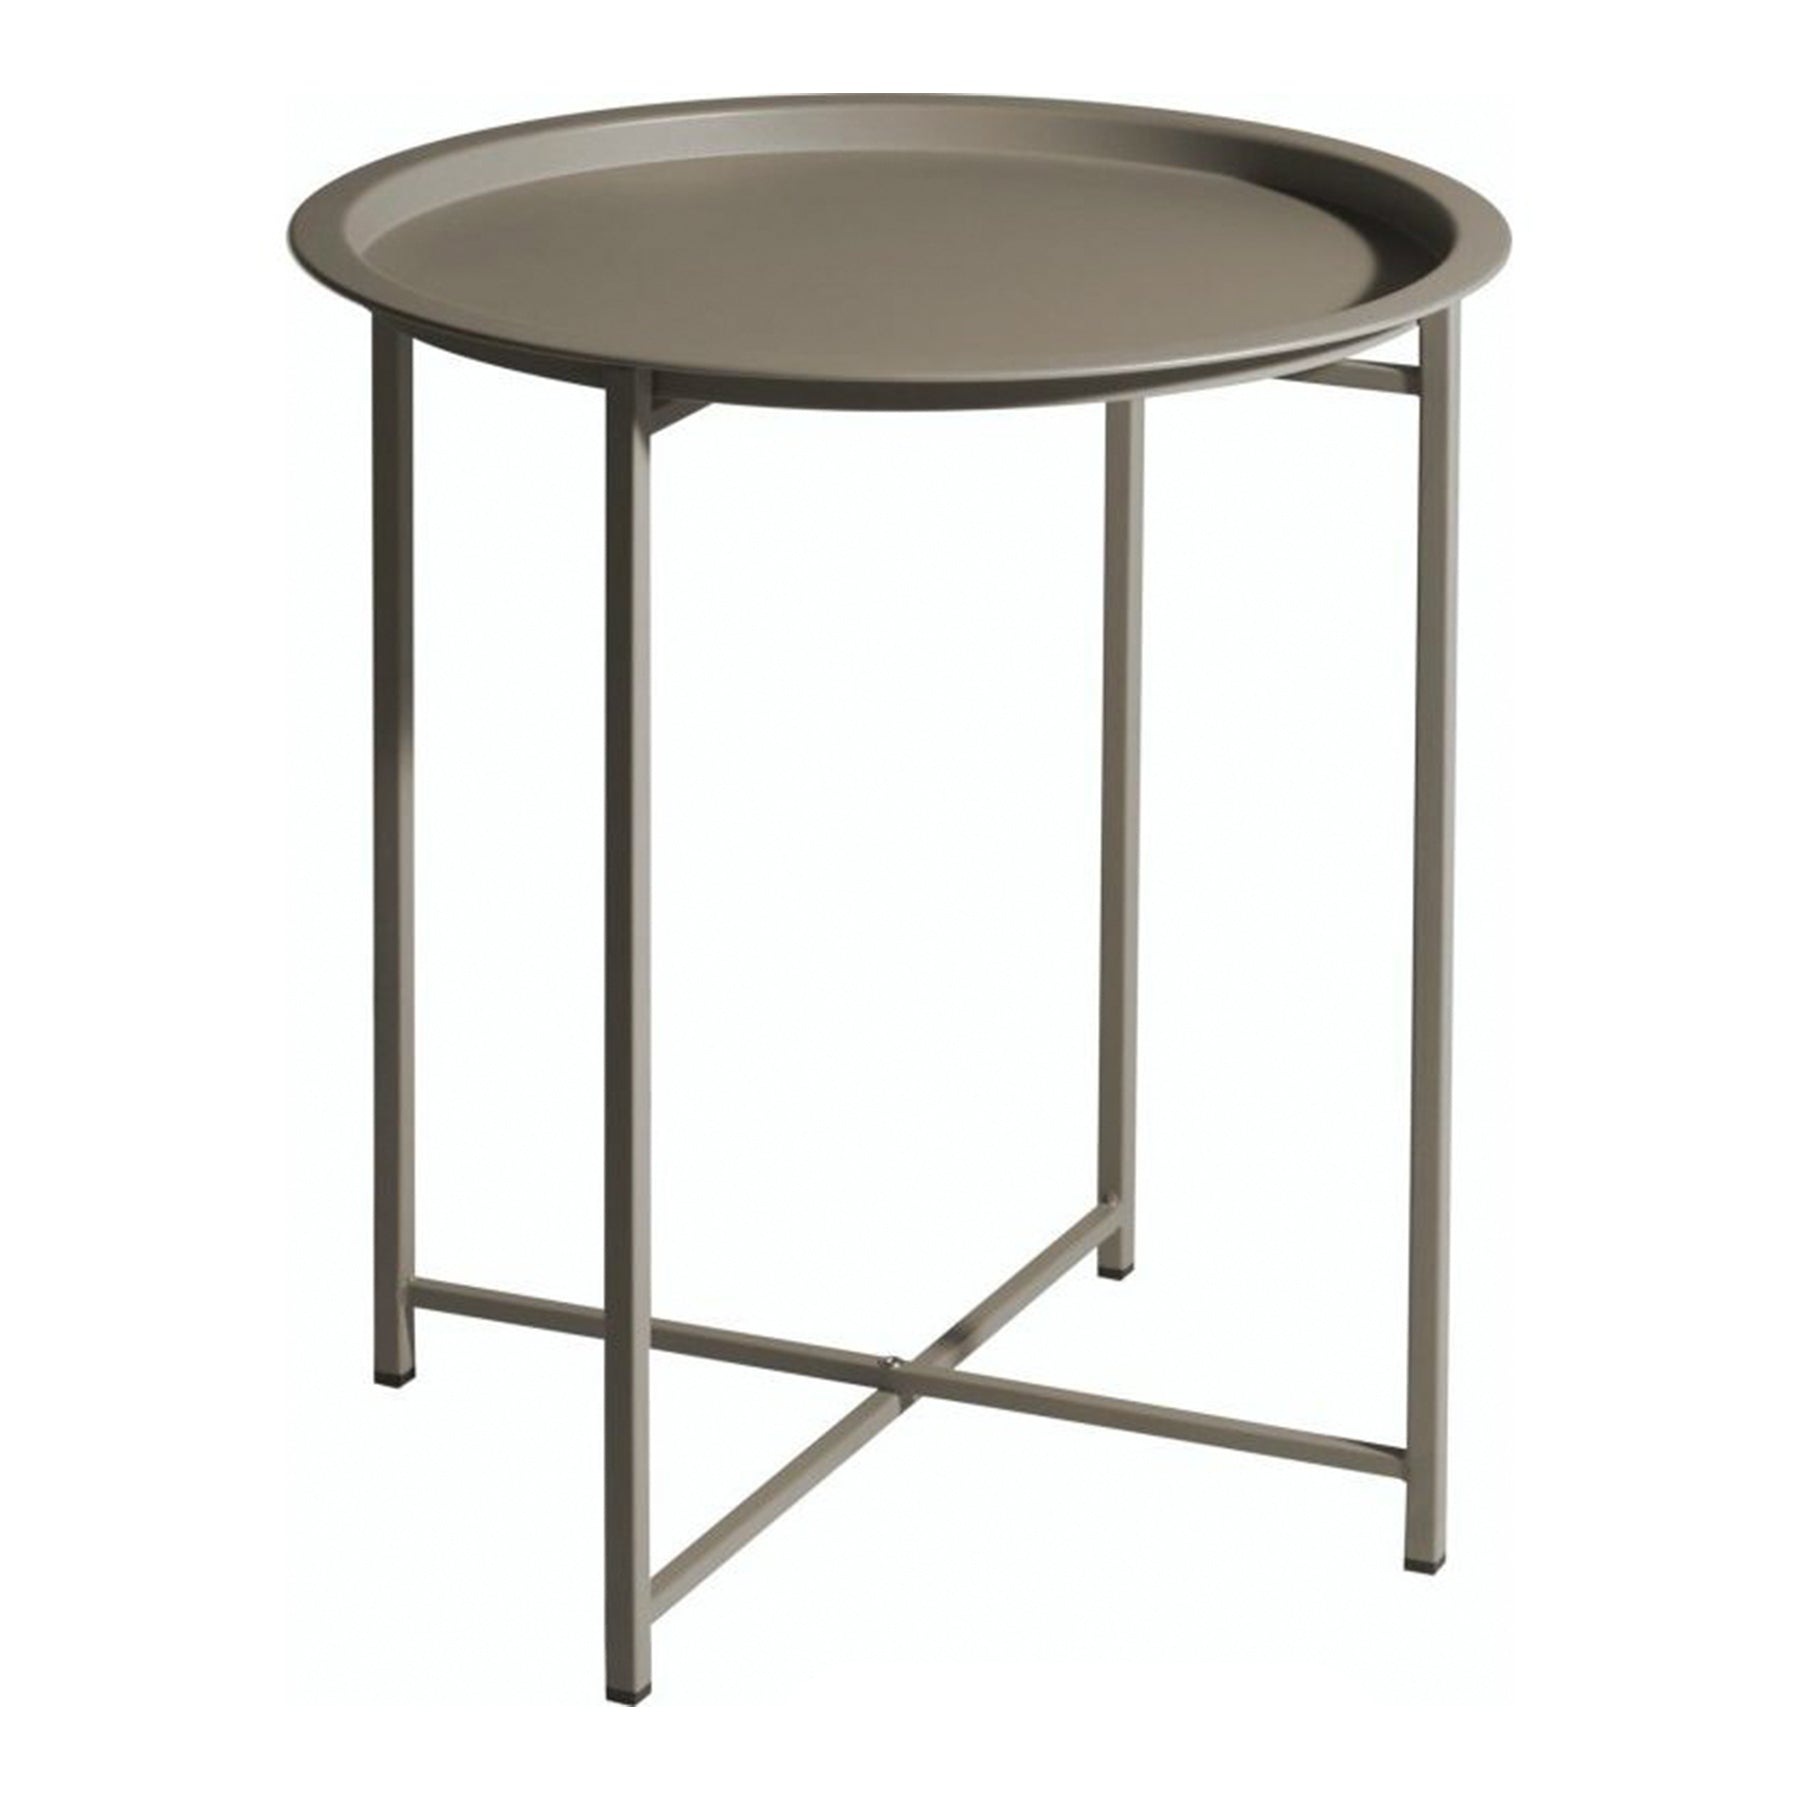 Round table - Matte taupe